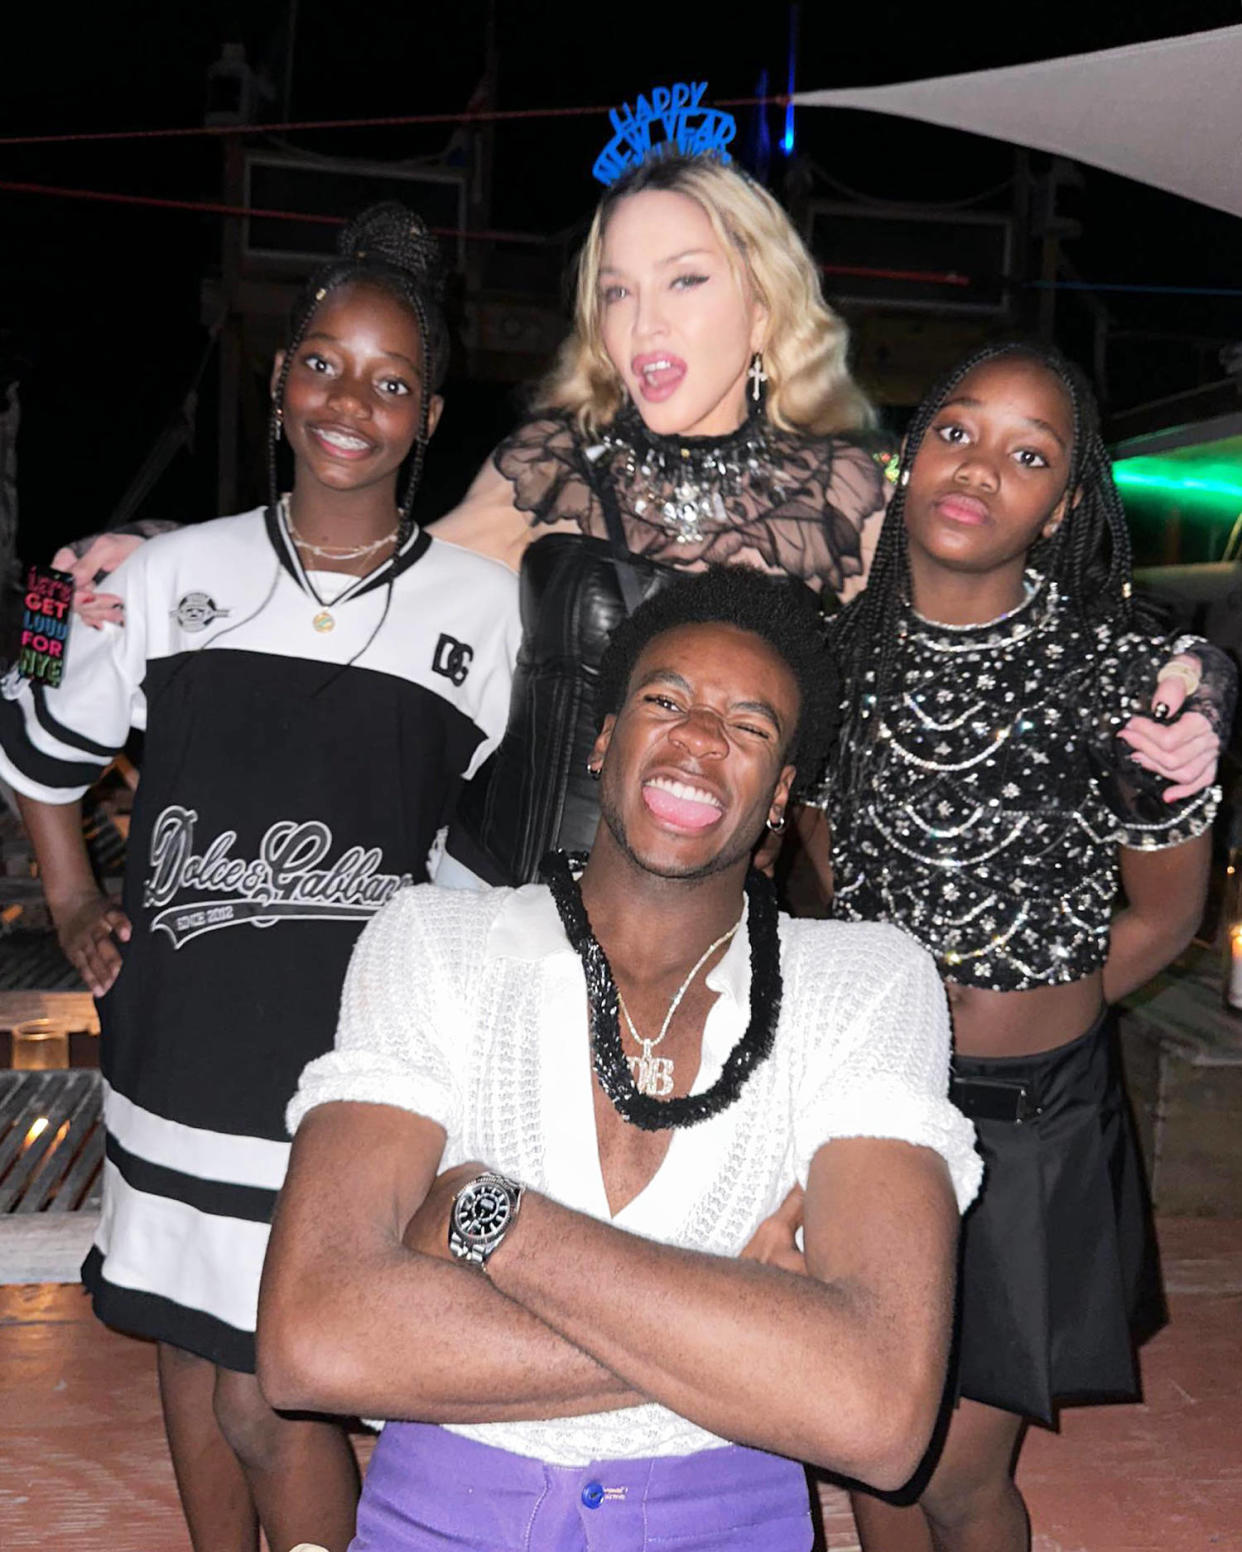 Madonna poses with three of her kids, David, Stella and Estere, at a New Year's Eve celebration. (@madonna via Instagram)